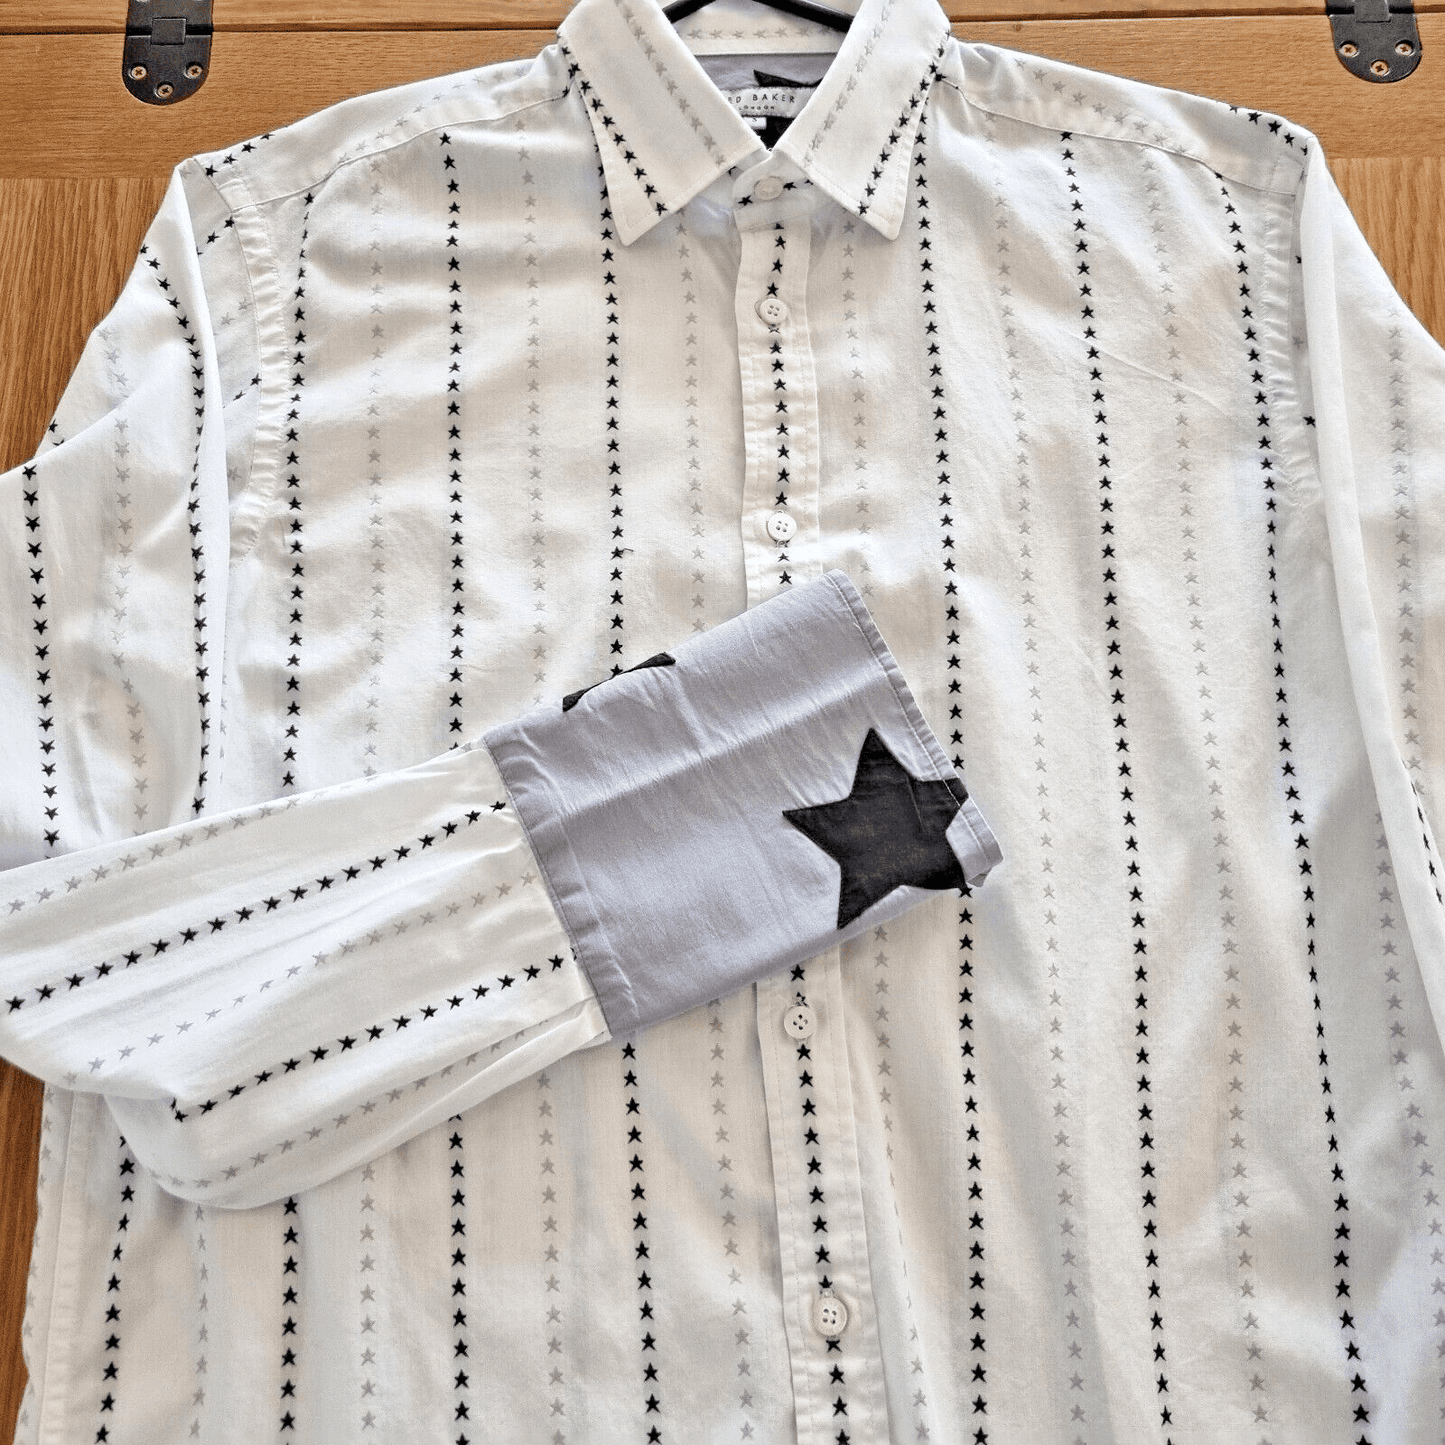 Mens Ted Baker Shirt Double Cuff Regular Fit White Long Sleeve Stars Grey Trim